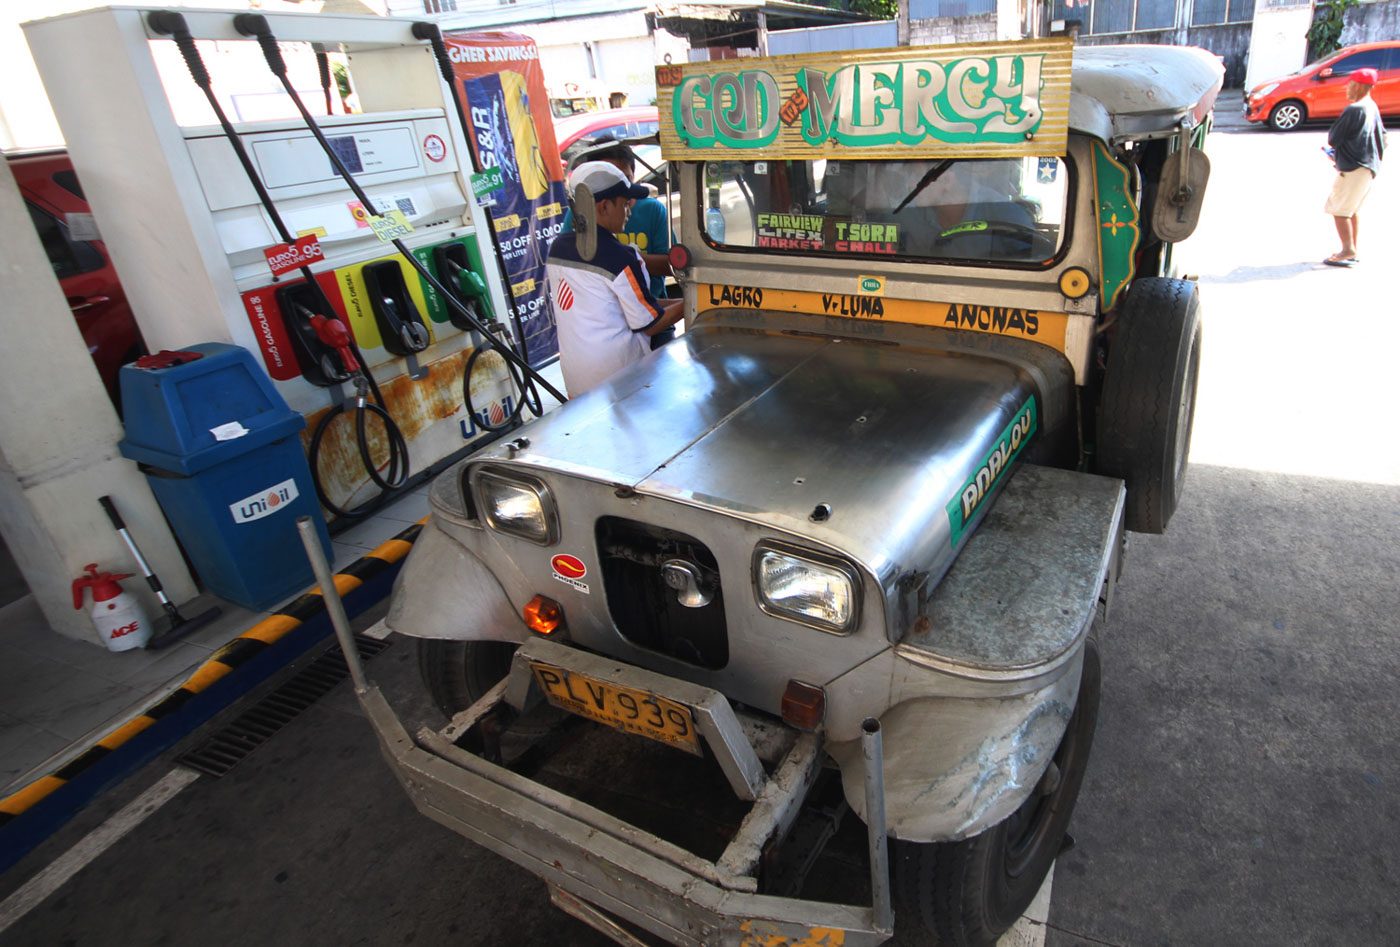 LTFRB brings back pre-pandemic jeepney routes amid growing transport woes